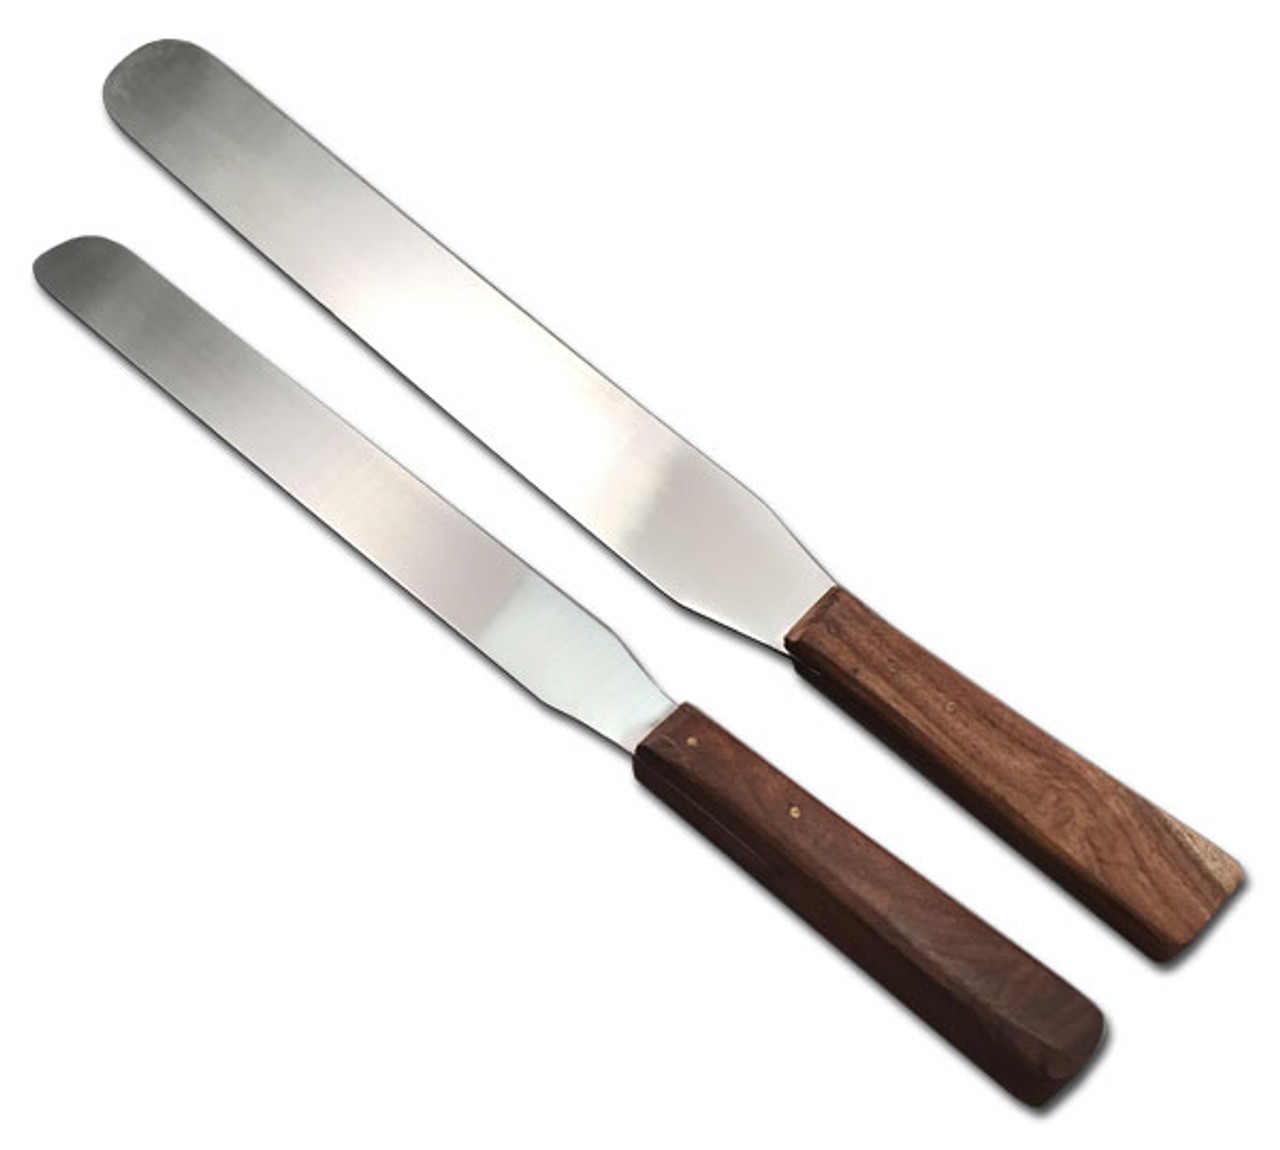 Spatula with Wooden Handle and 10" stainless steel blade